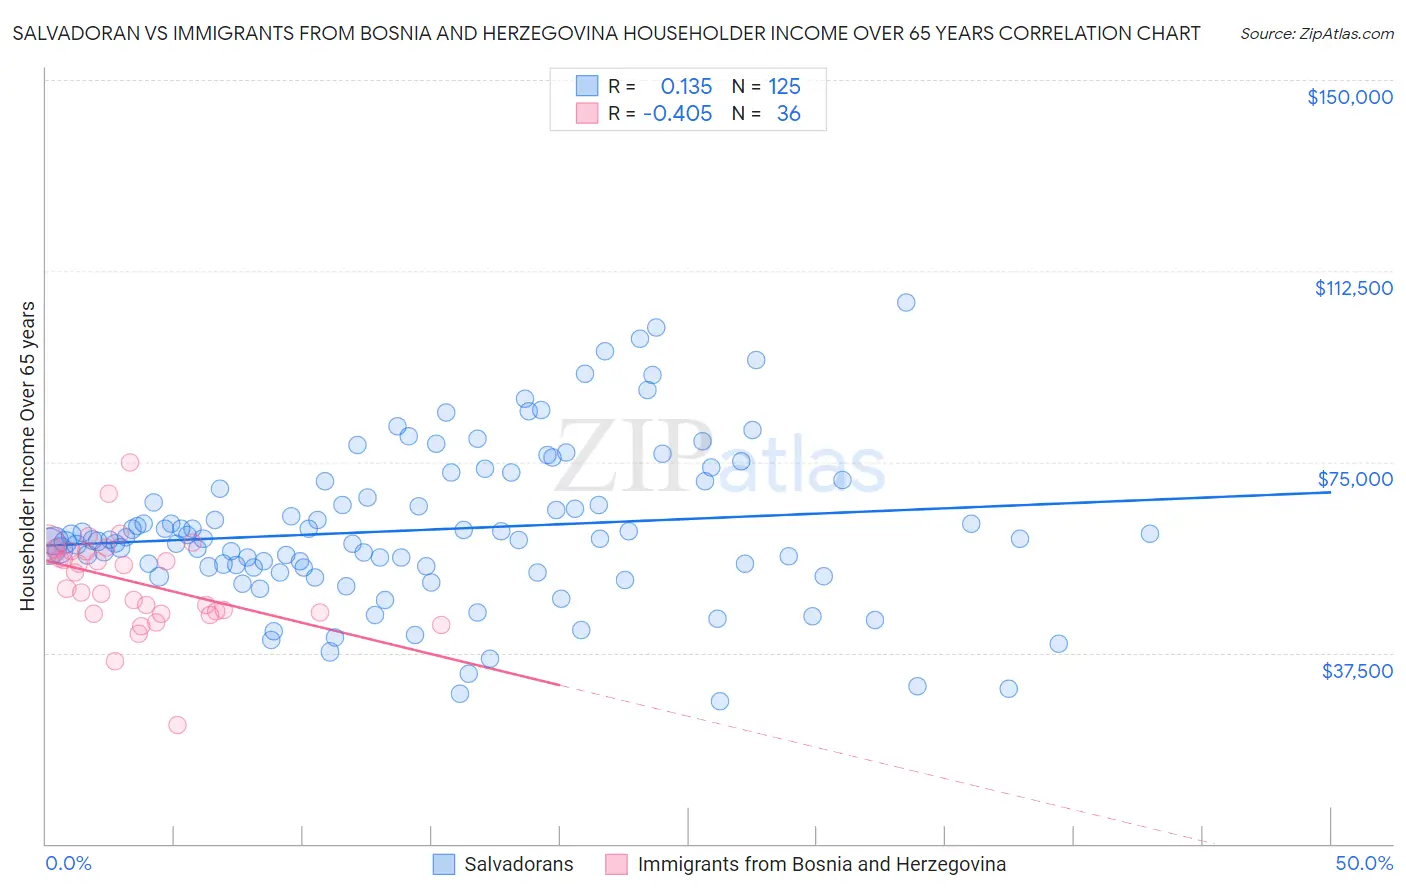 Salvadoran vs Immigrants from Bosnia and Herzegovina Householder Income Over 65 years